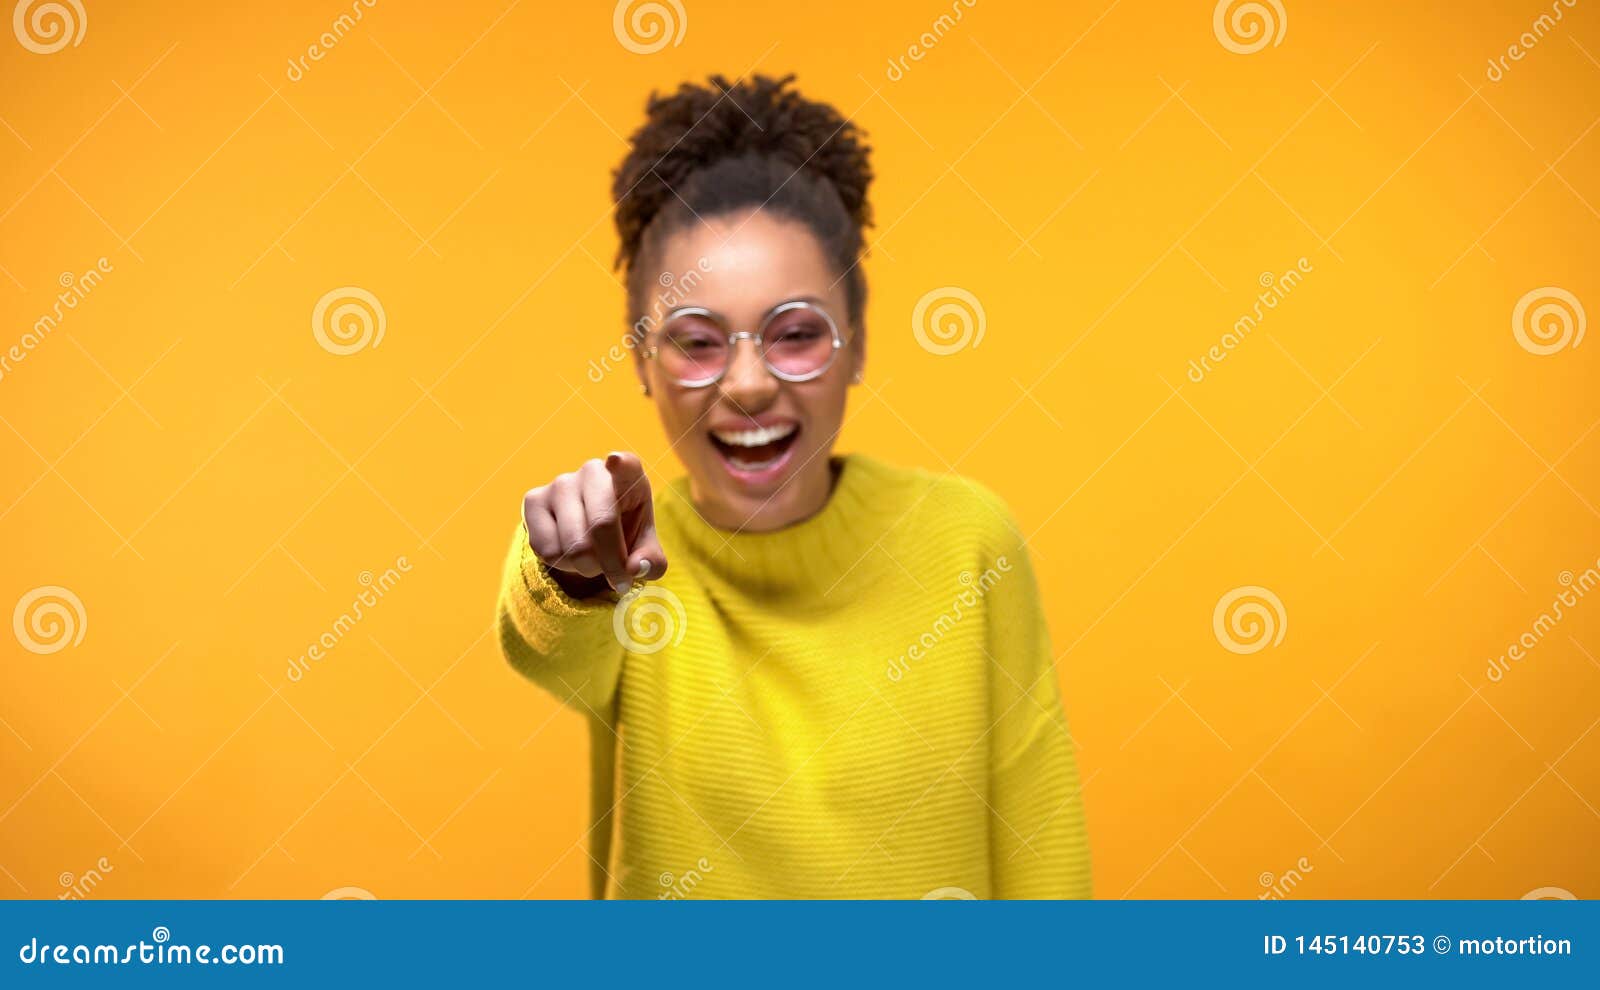 laughing young female pointing finger in camera, having fun, joking, positivity